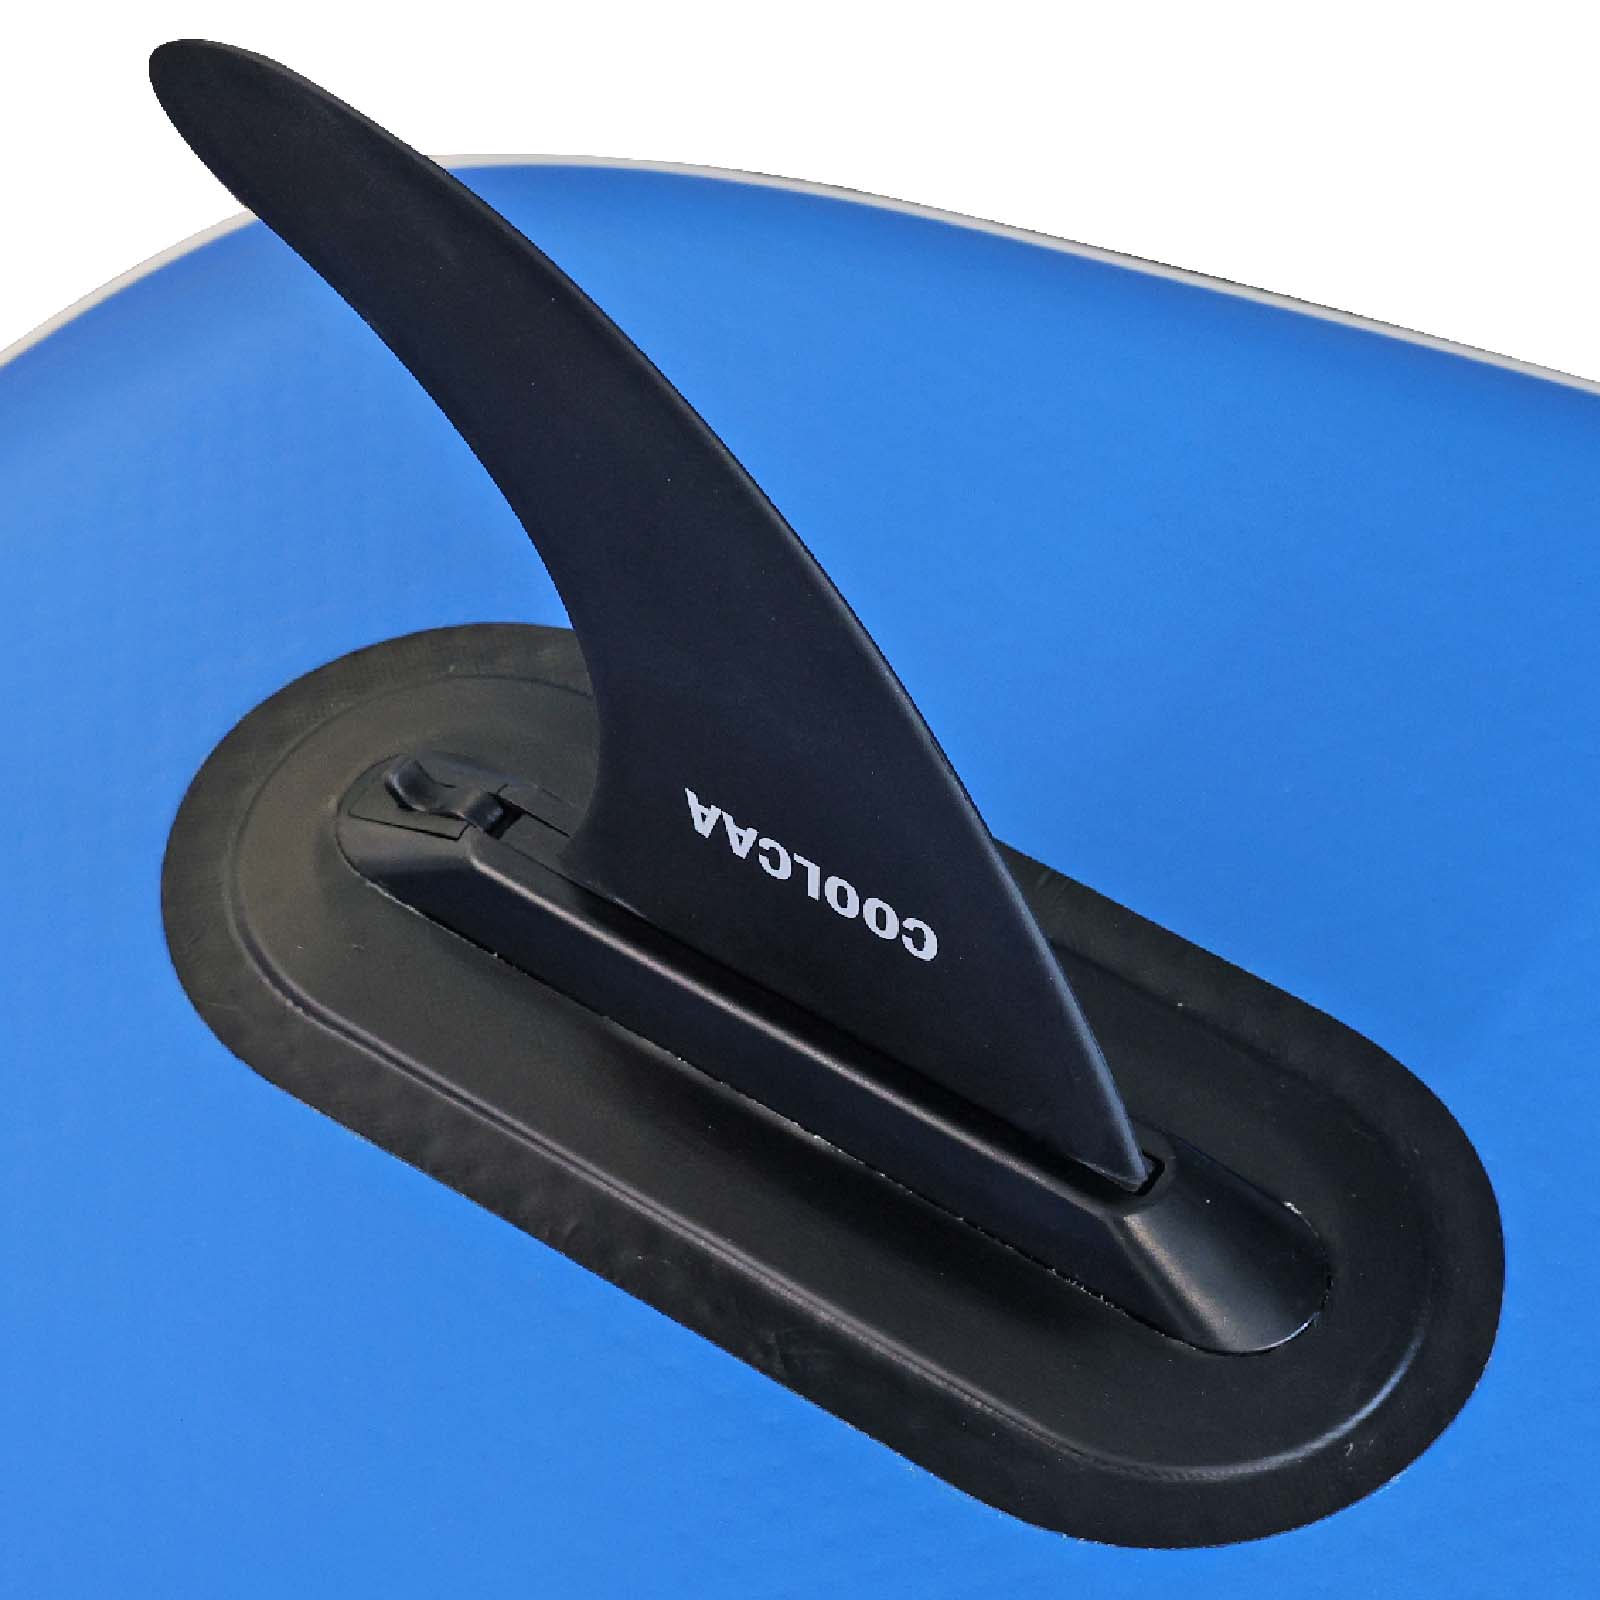 COOLCAA Flip Lock Fin for SUP